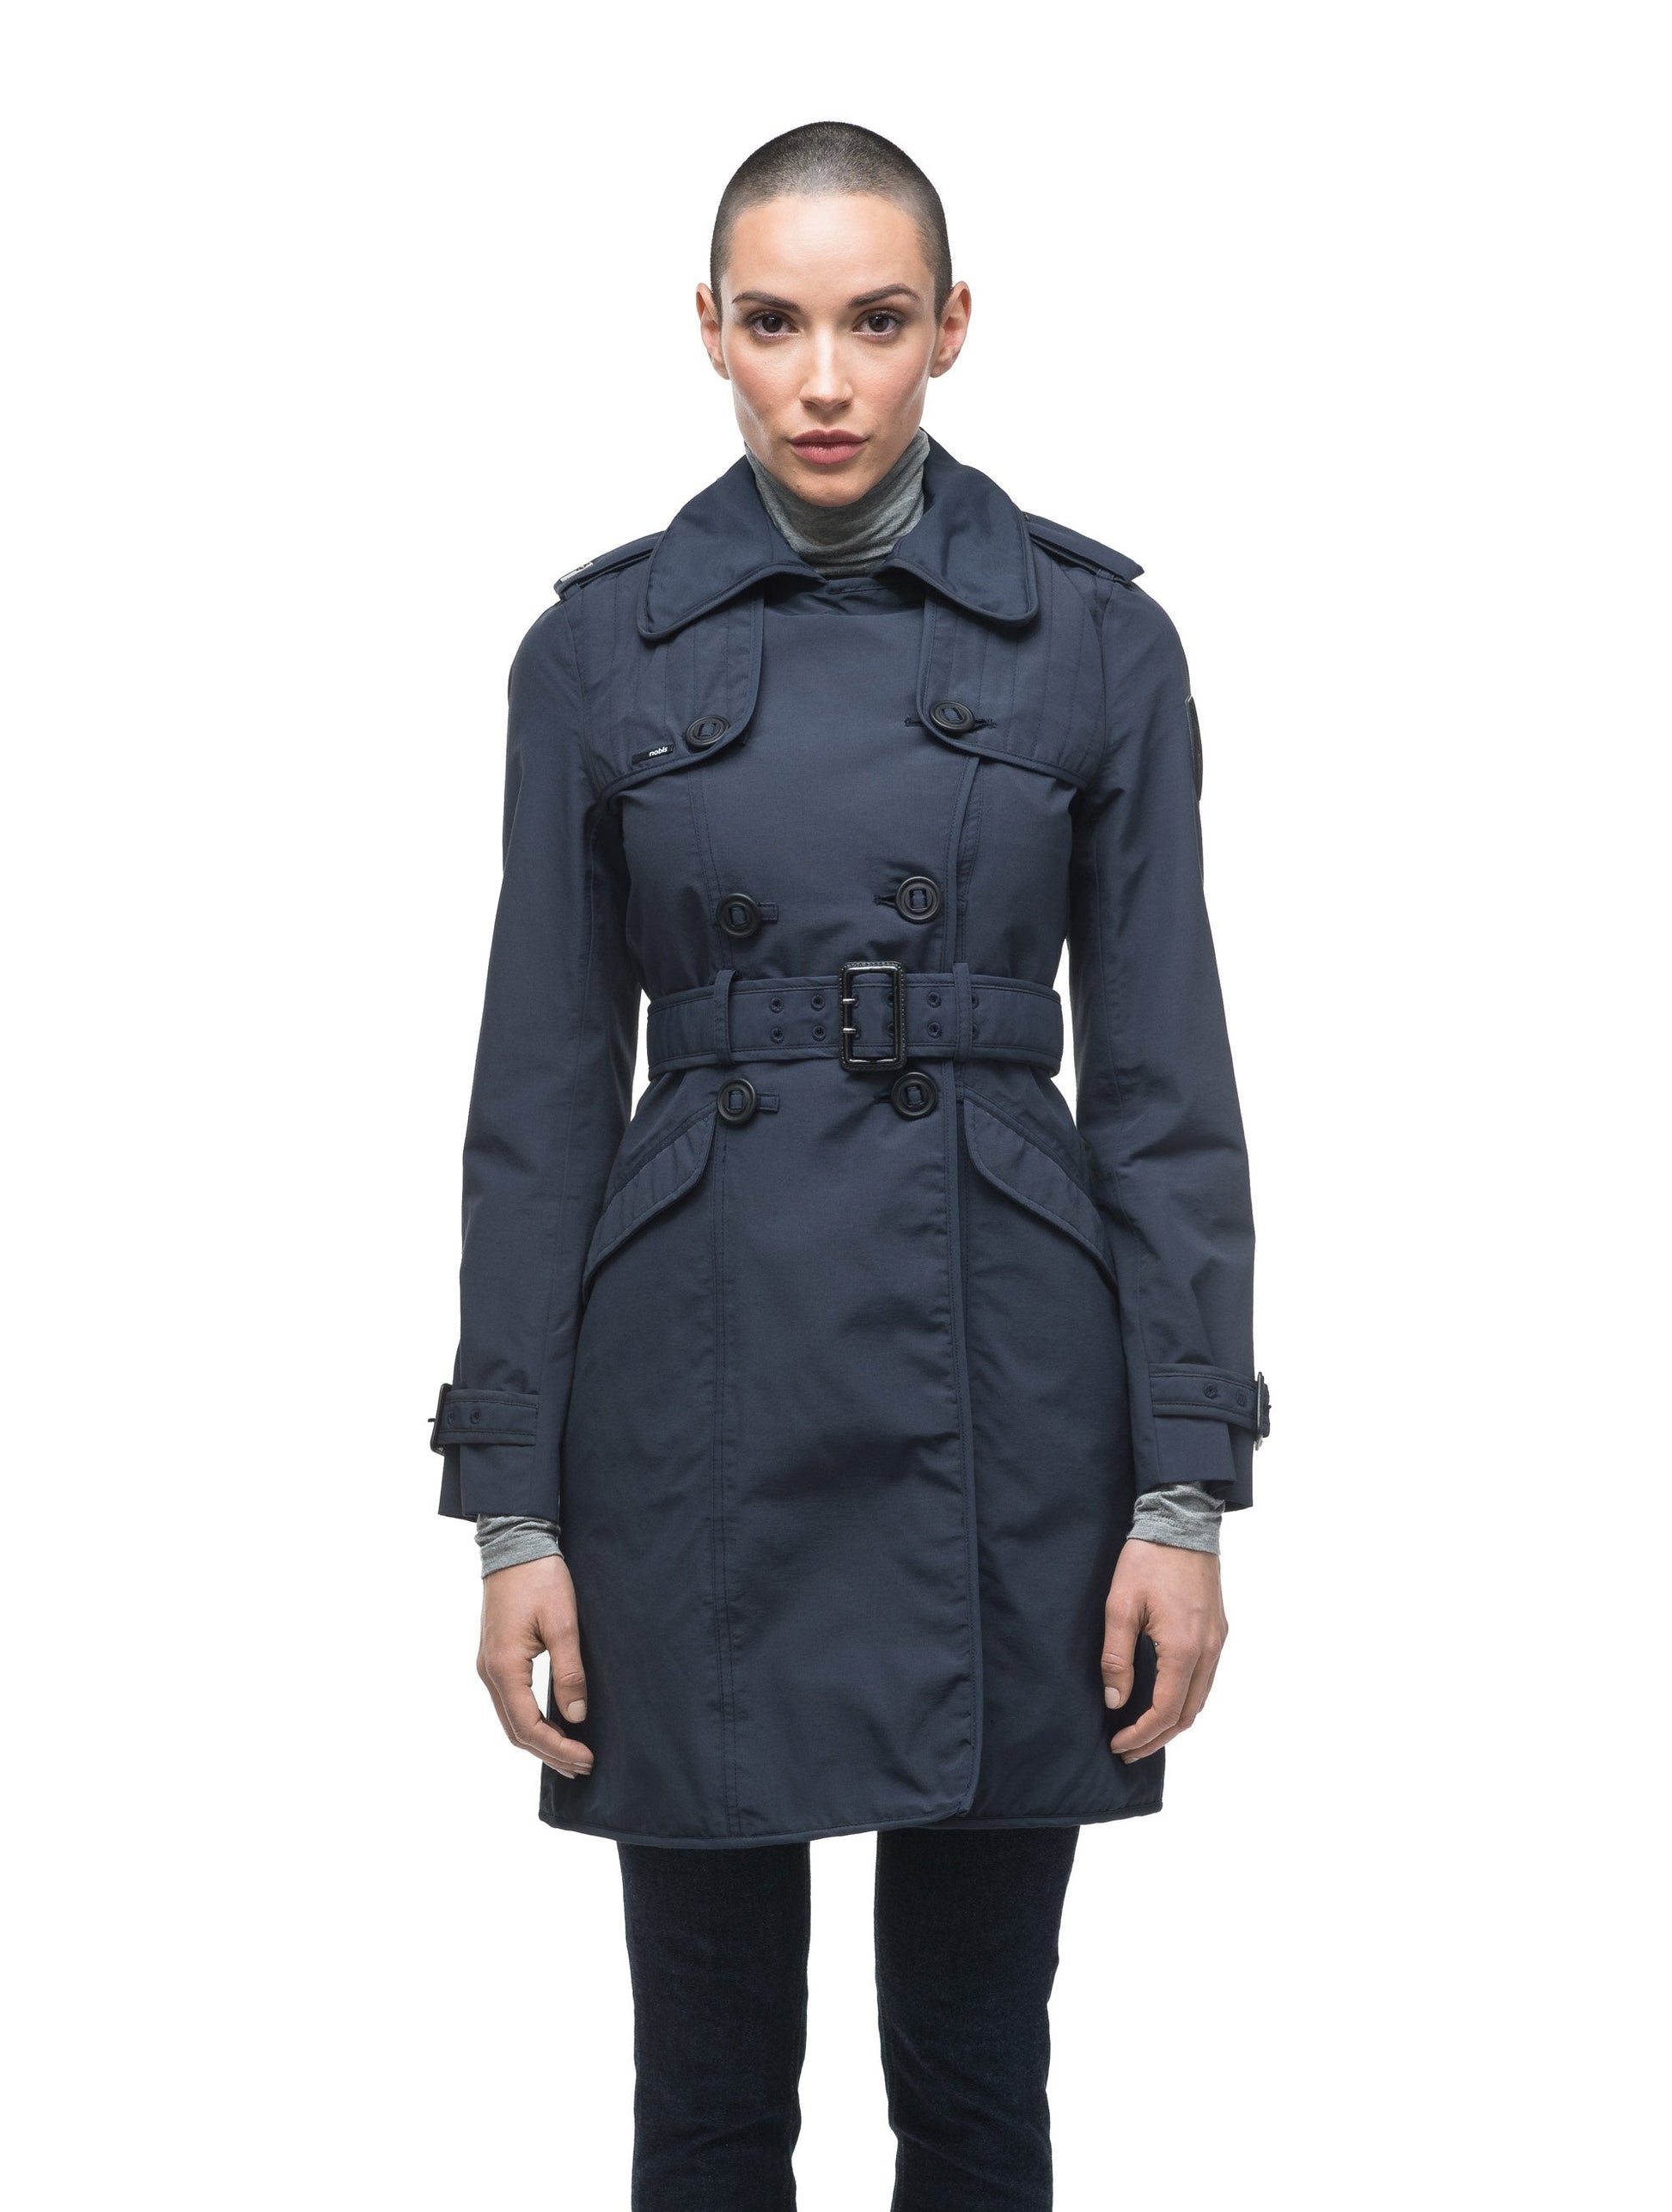 Women's classic trench coat that falls just above the knee in Navy